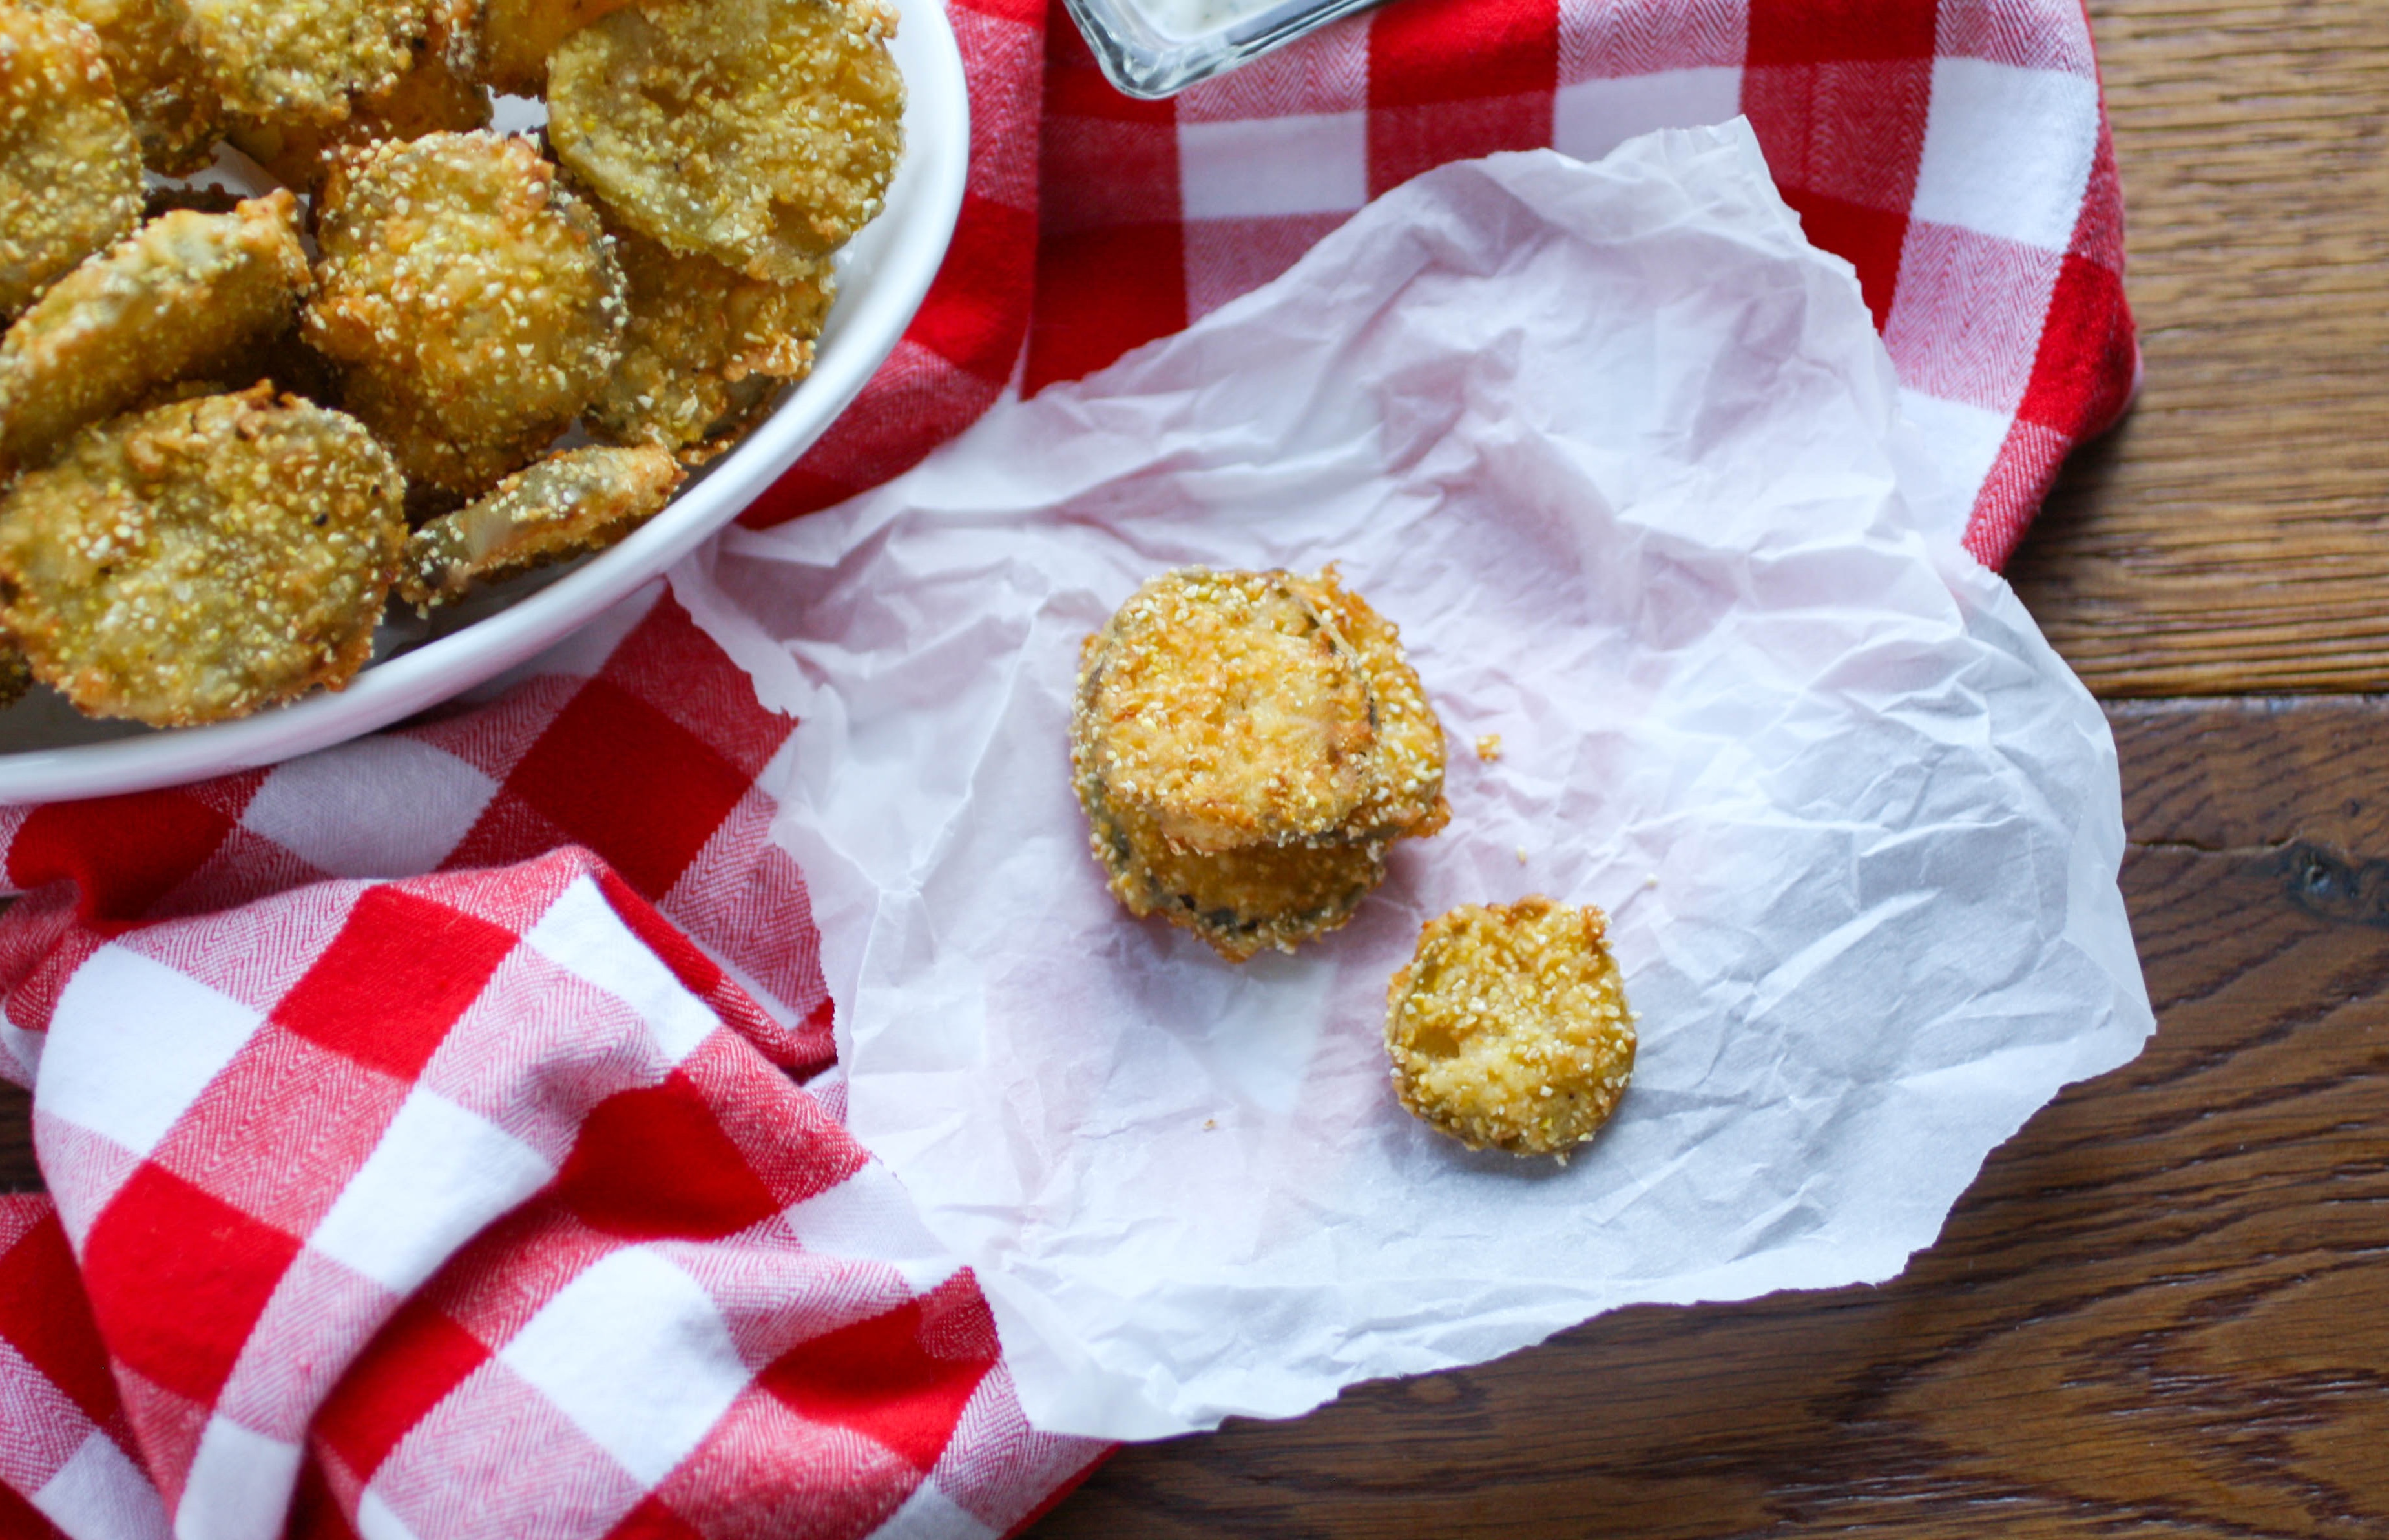 Fried Pickles with Homemade Buttermilk Ranch Dressing are little gems to snack on that are so delicious! You'll love these fried pickles as a snack anytime!